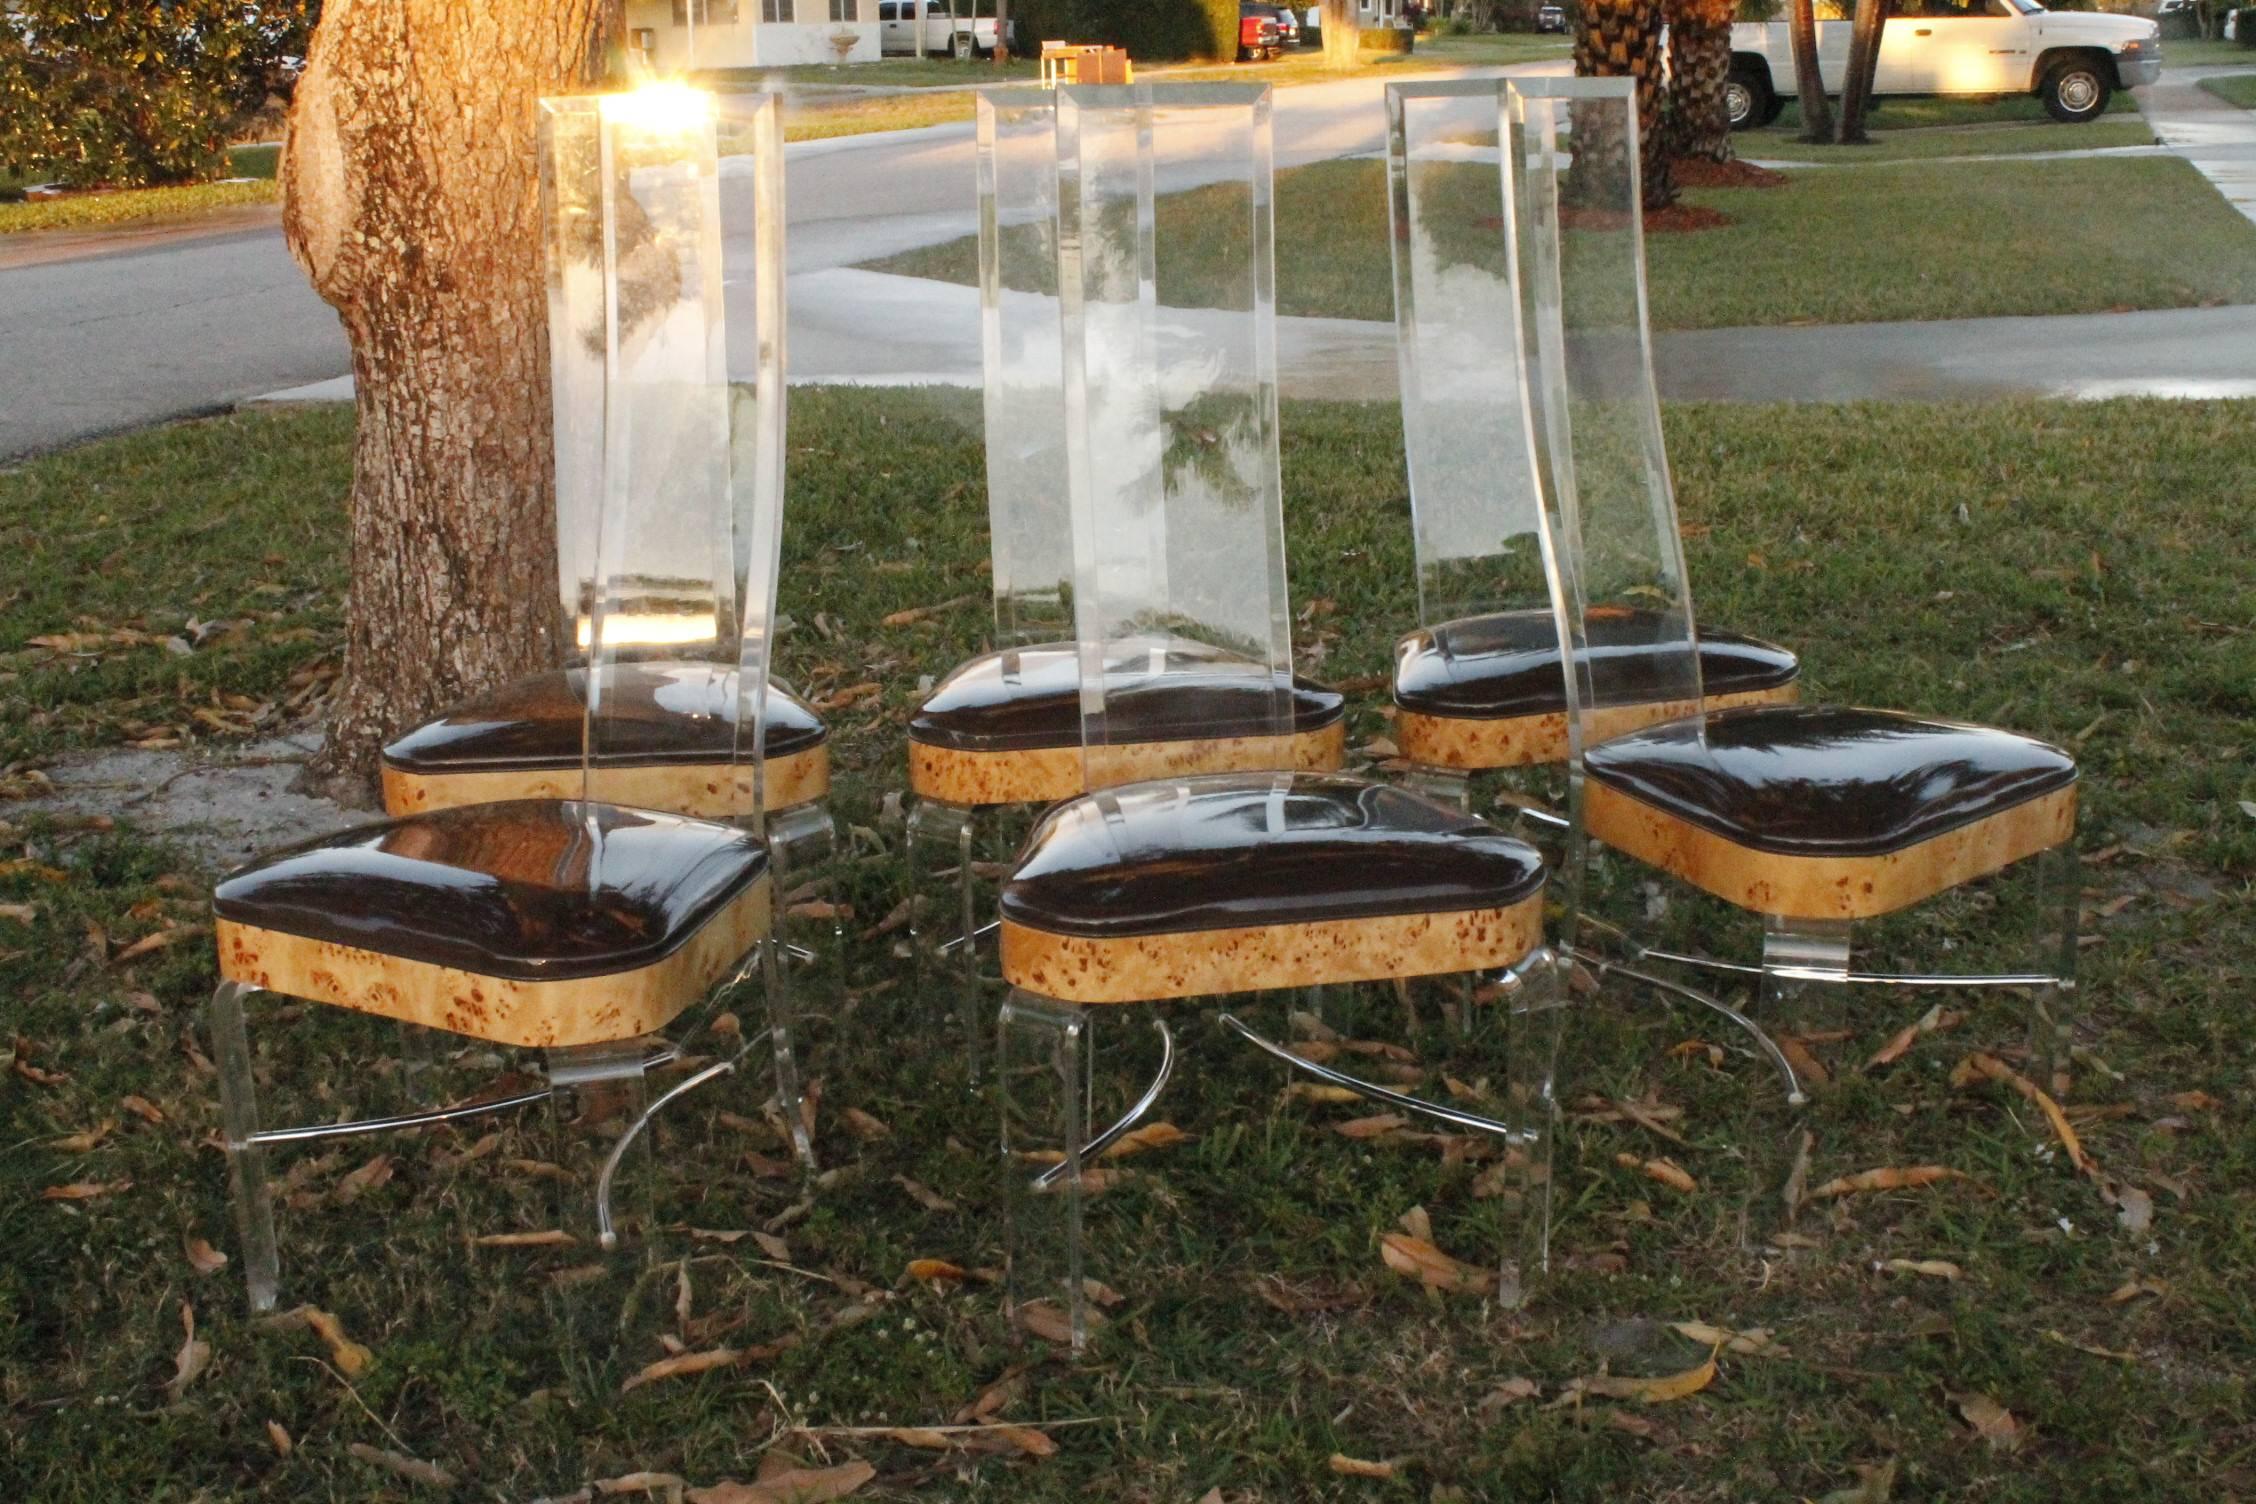 hill manufacturing lucite chairs